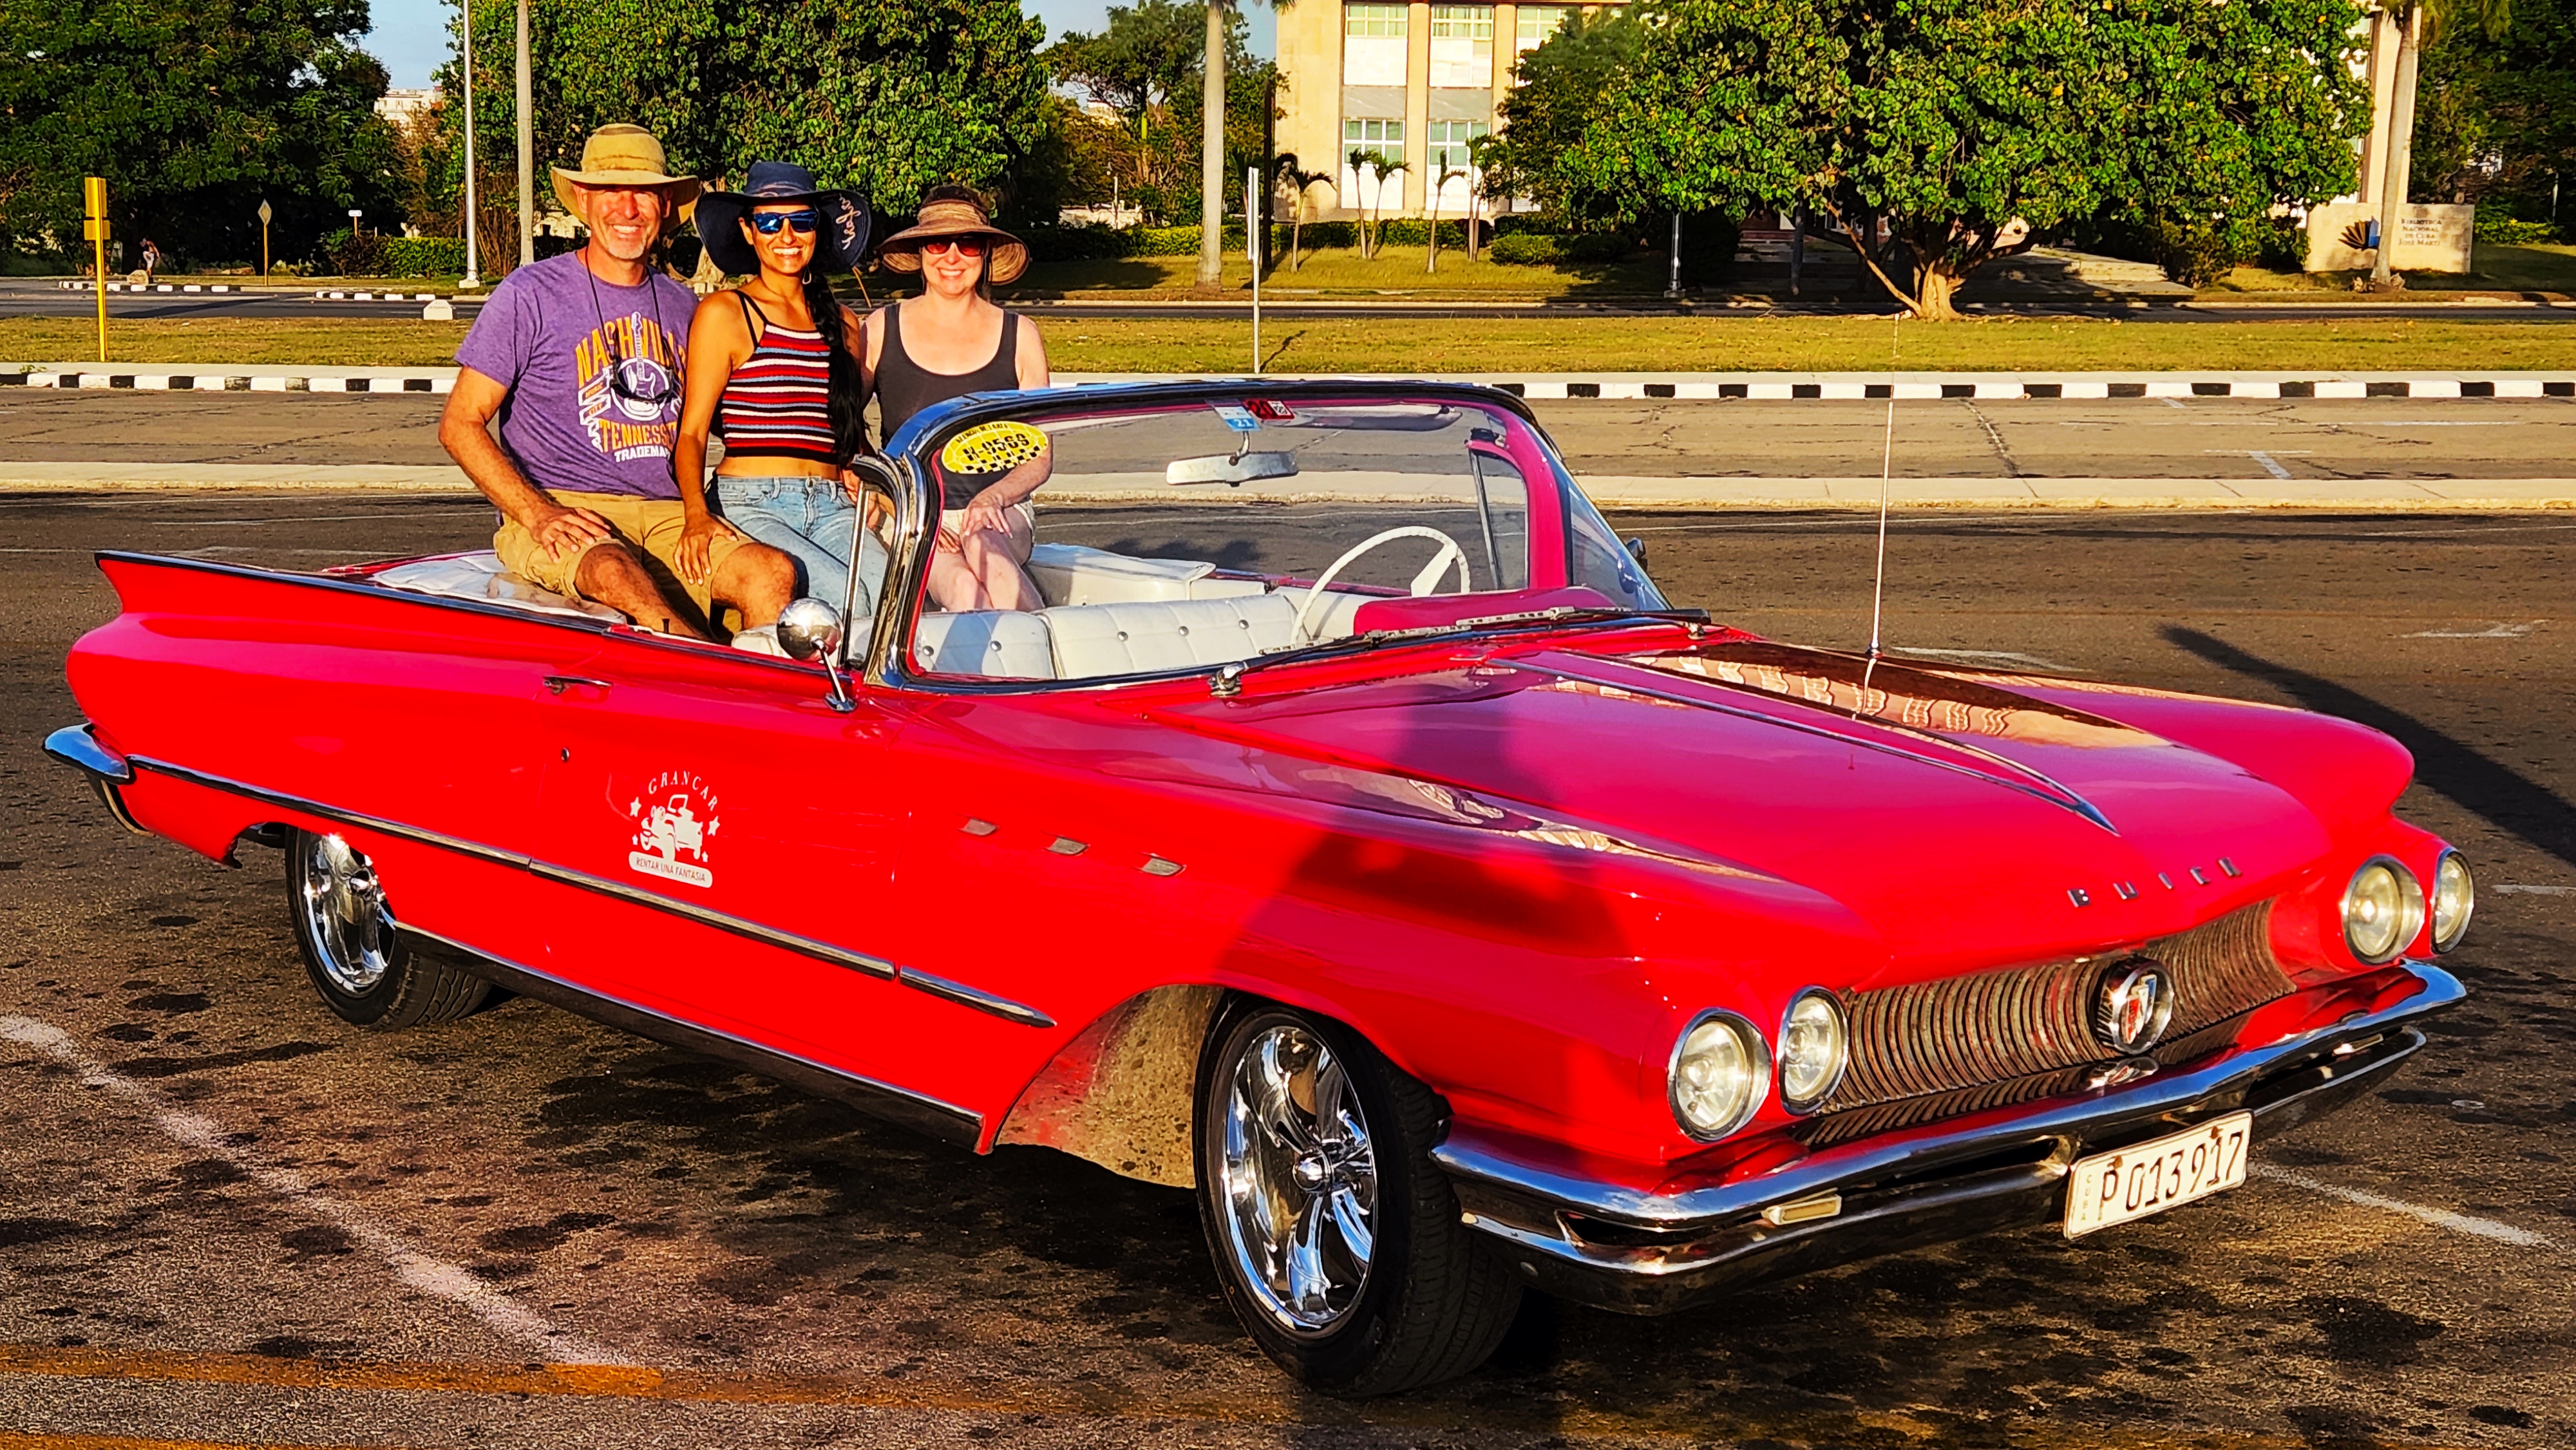 Is Cuba really full of ’50s American cars?